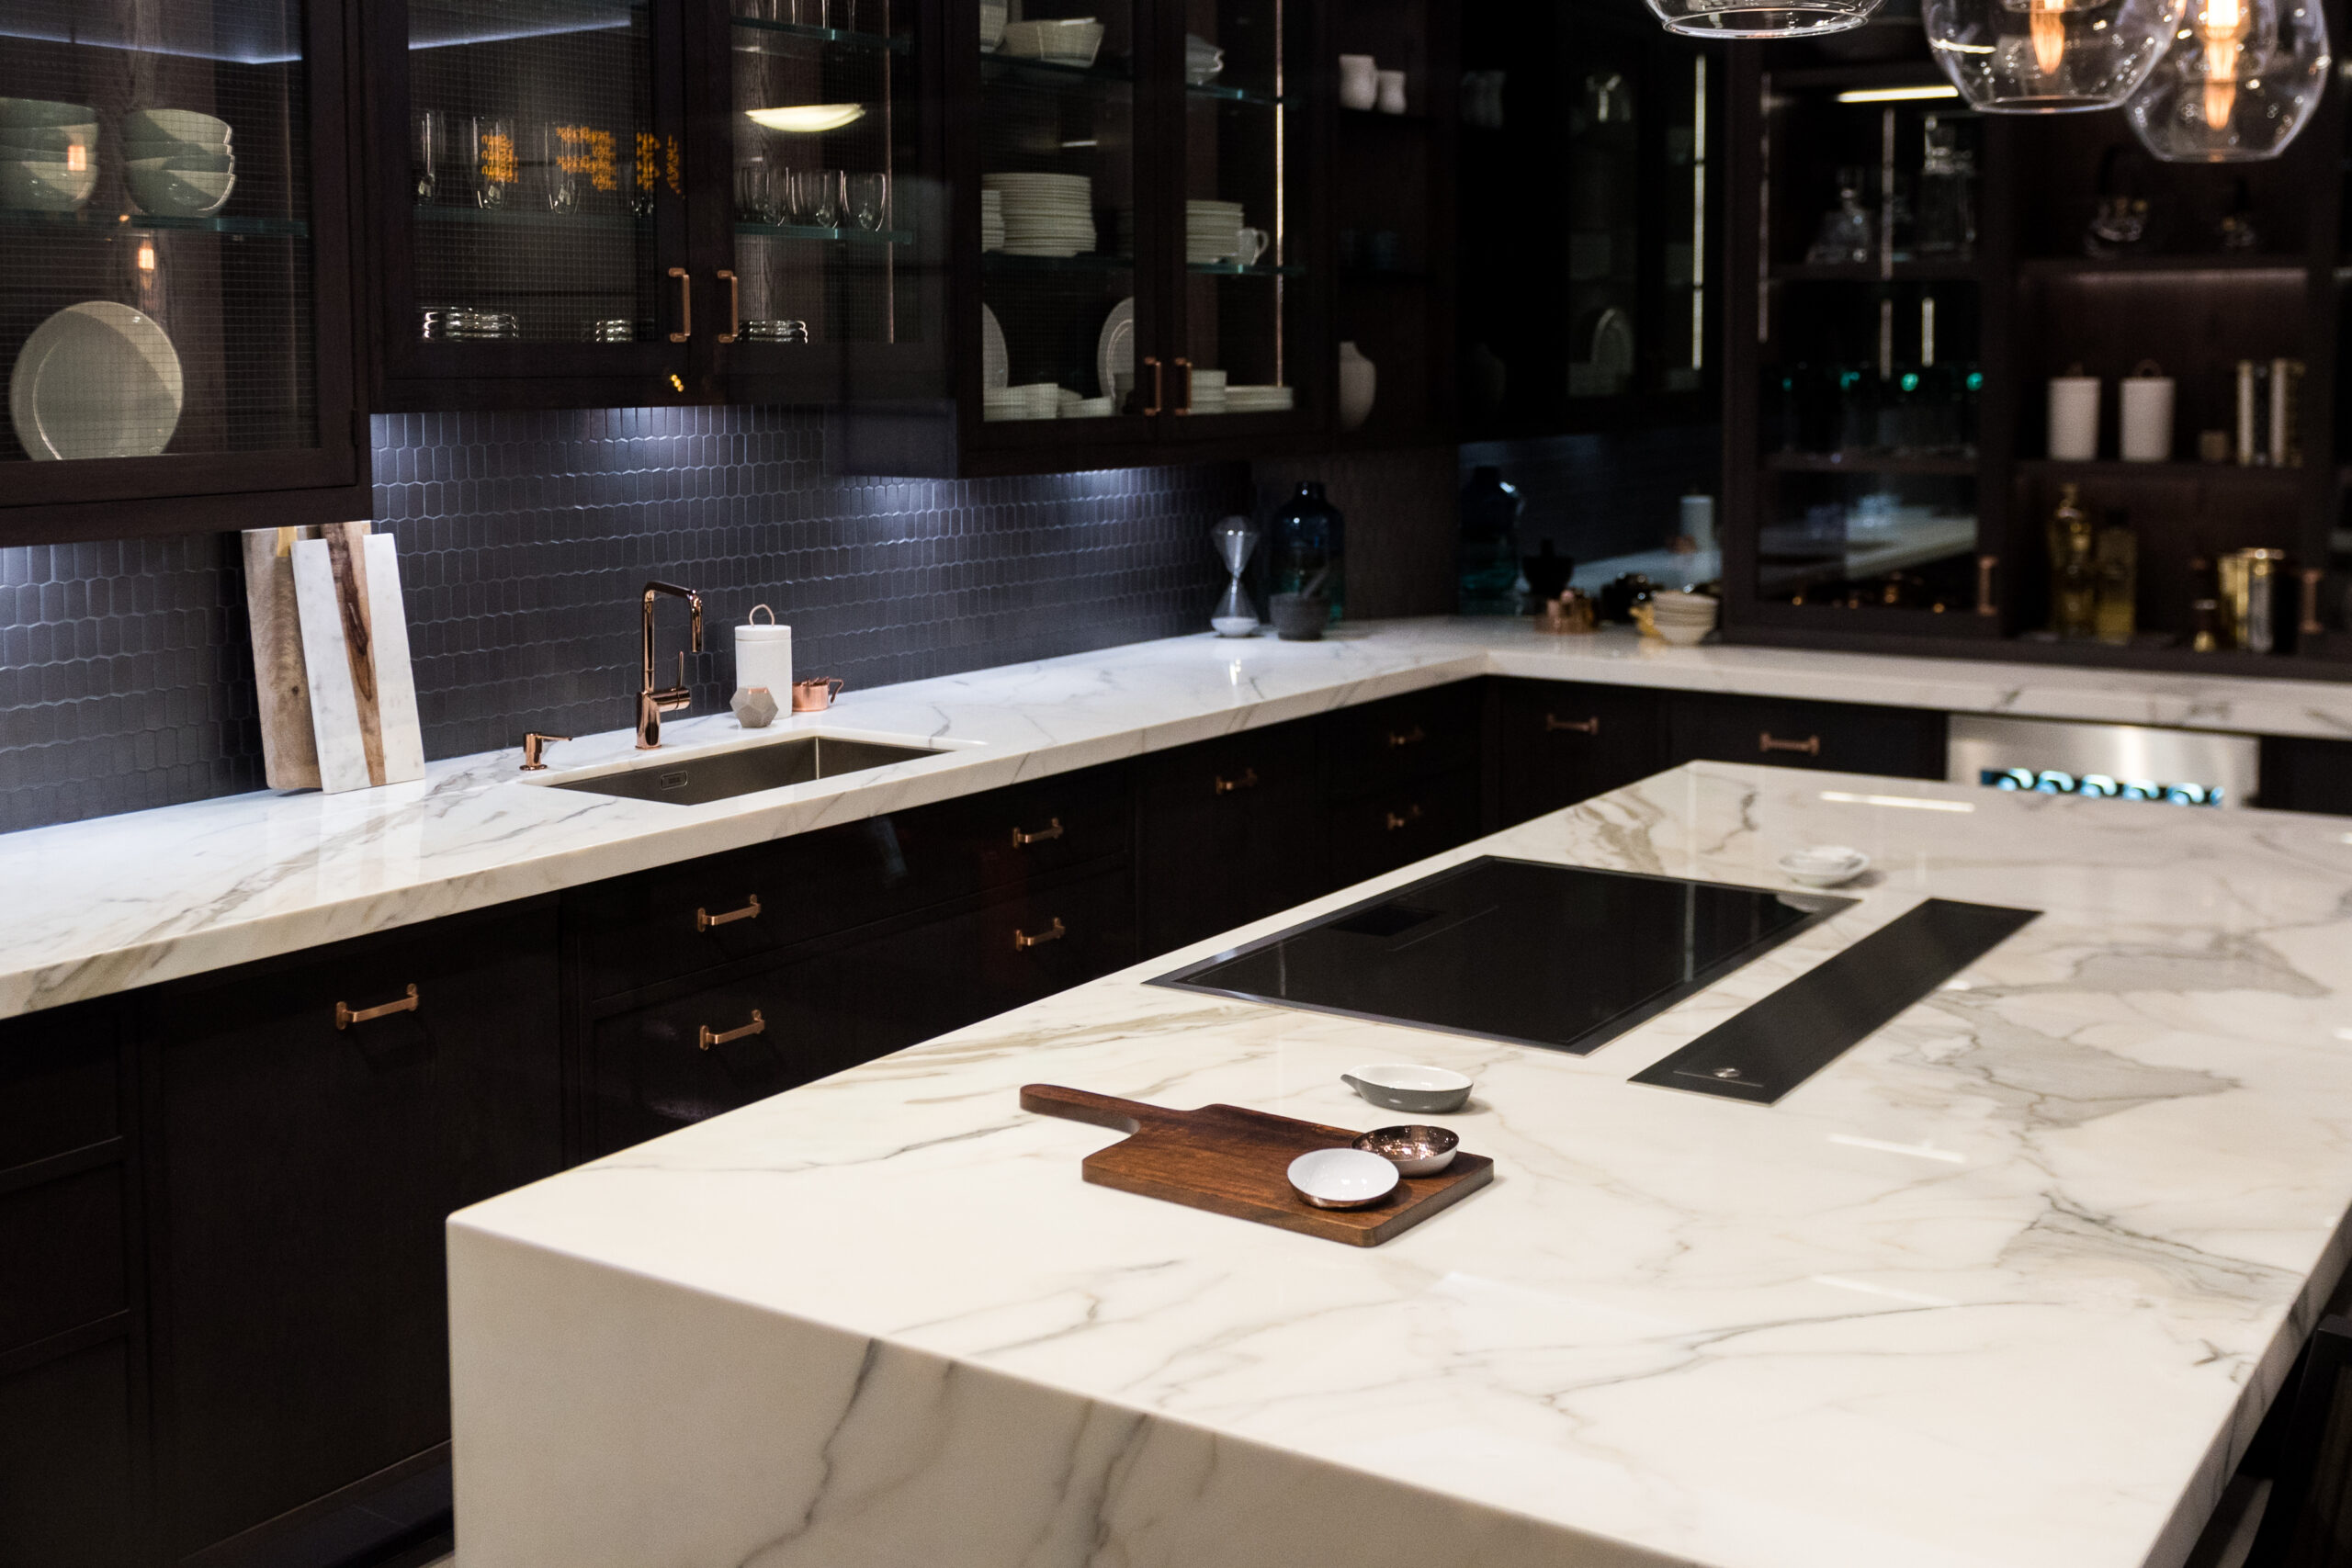 Bespoke High Quality Kitchen with Large Marble Counter Top.